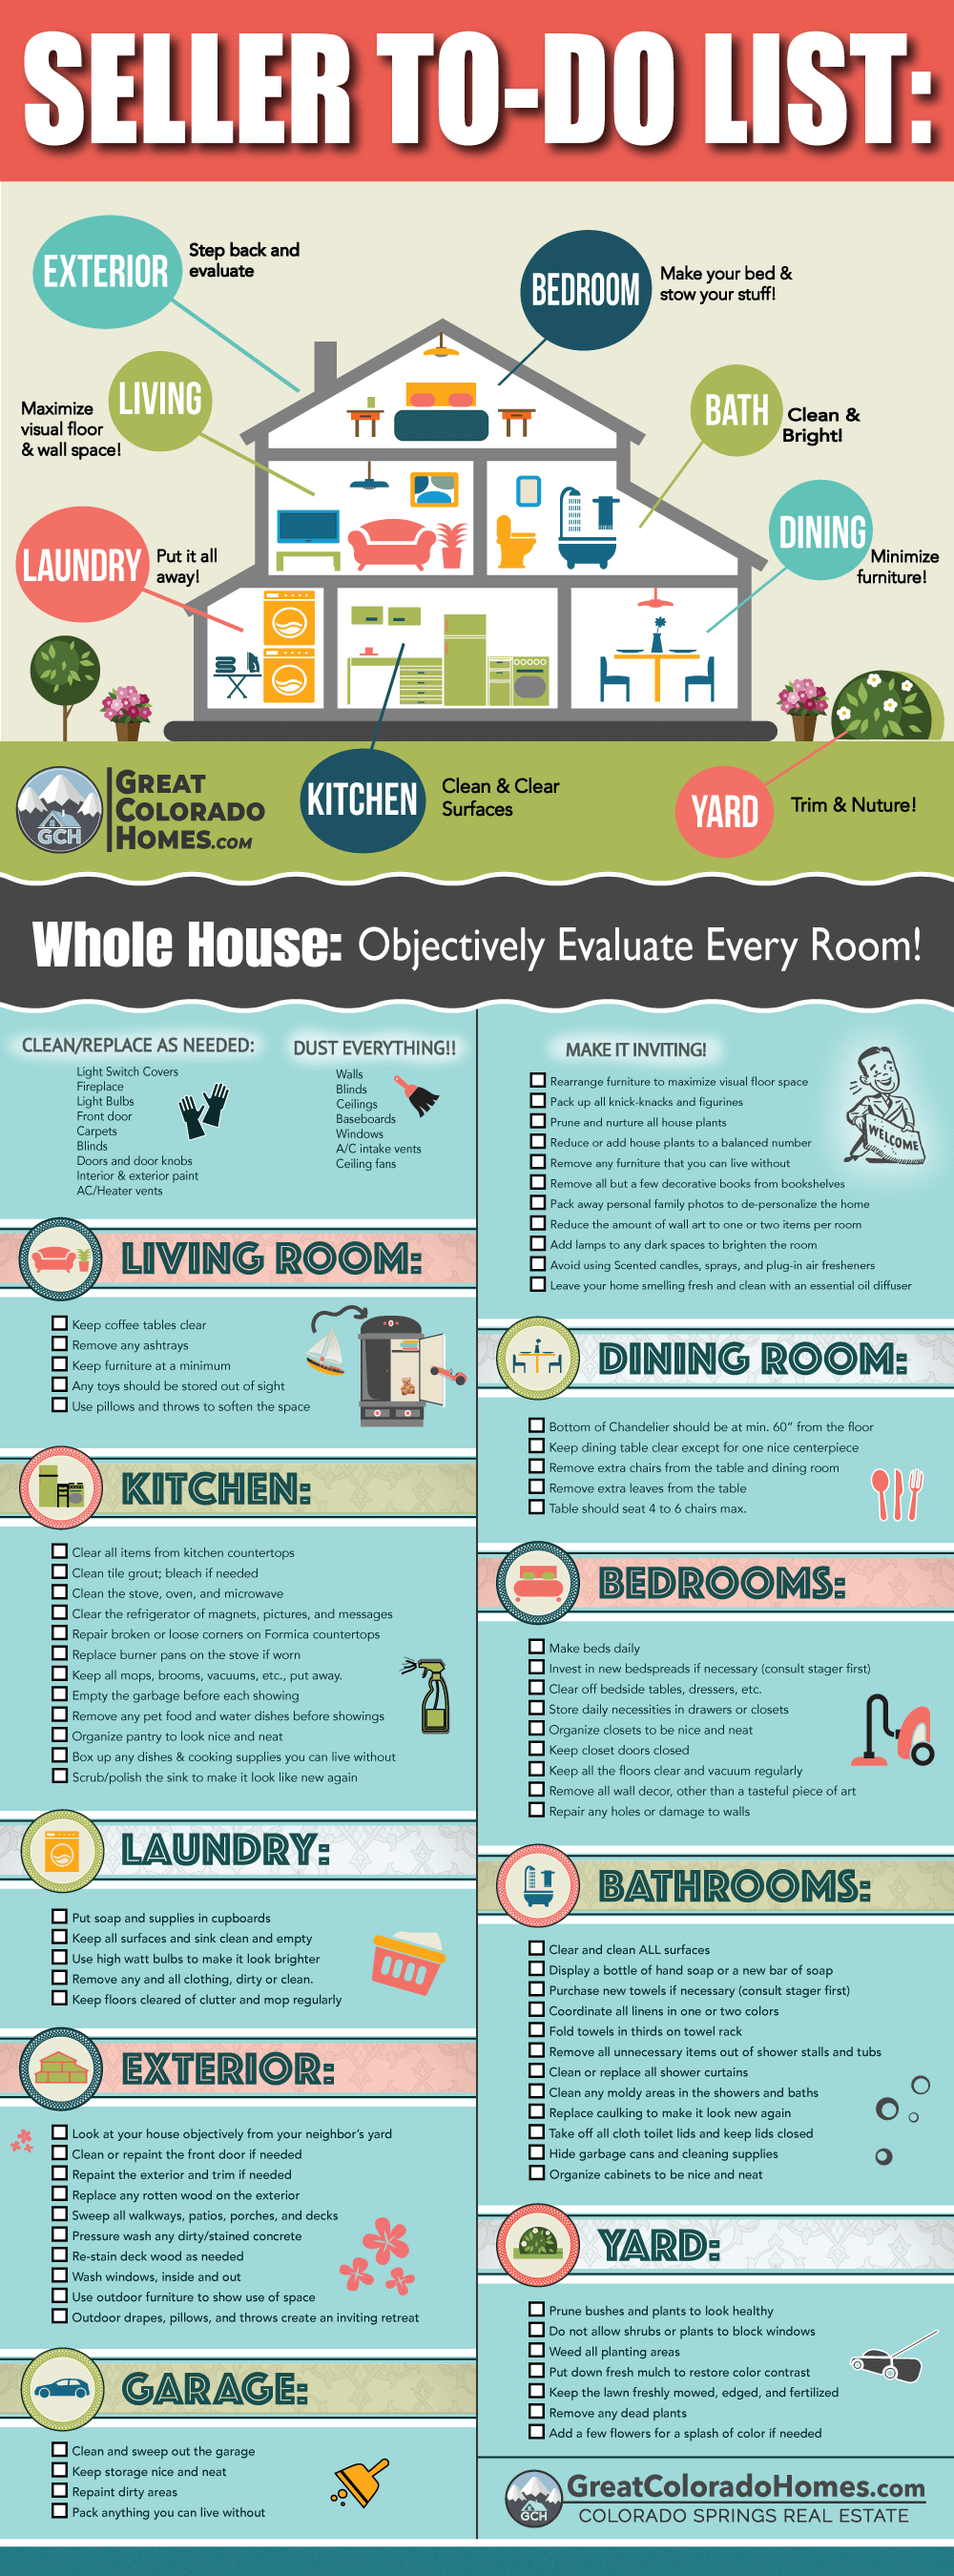 The Ultimate Home Sellers Checklist Guide - Get Your House Ready